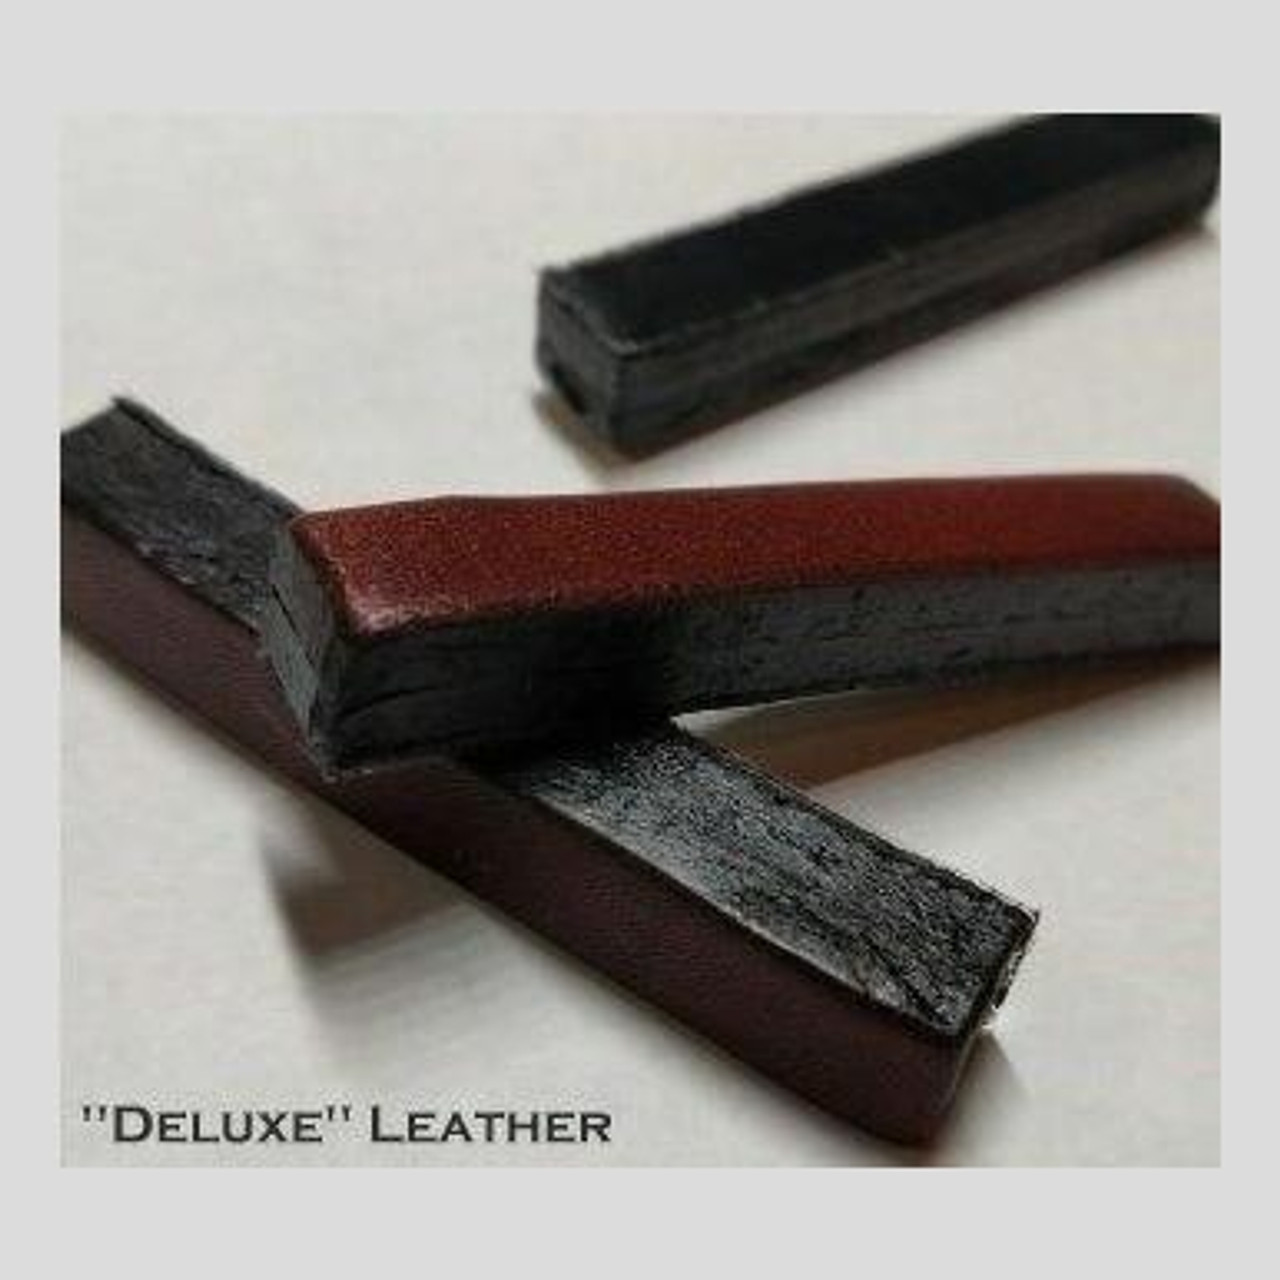 Match N Patch Self-Adhesive Dark Brown Leather Repair Tape, 3 inch X 72 inch